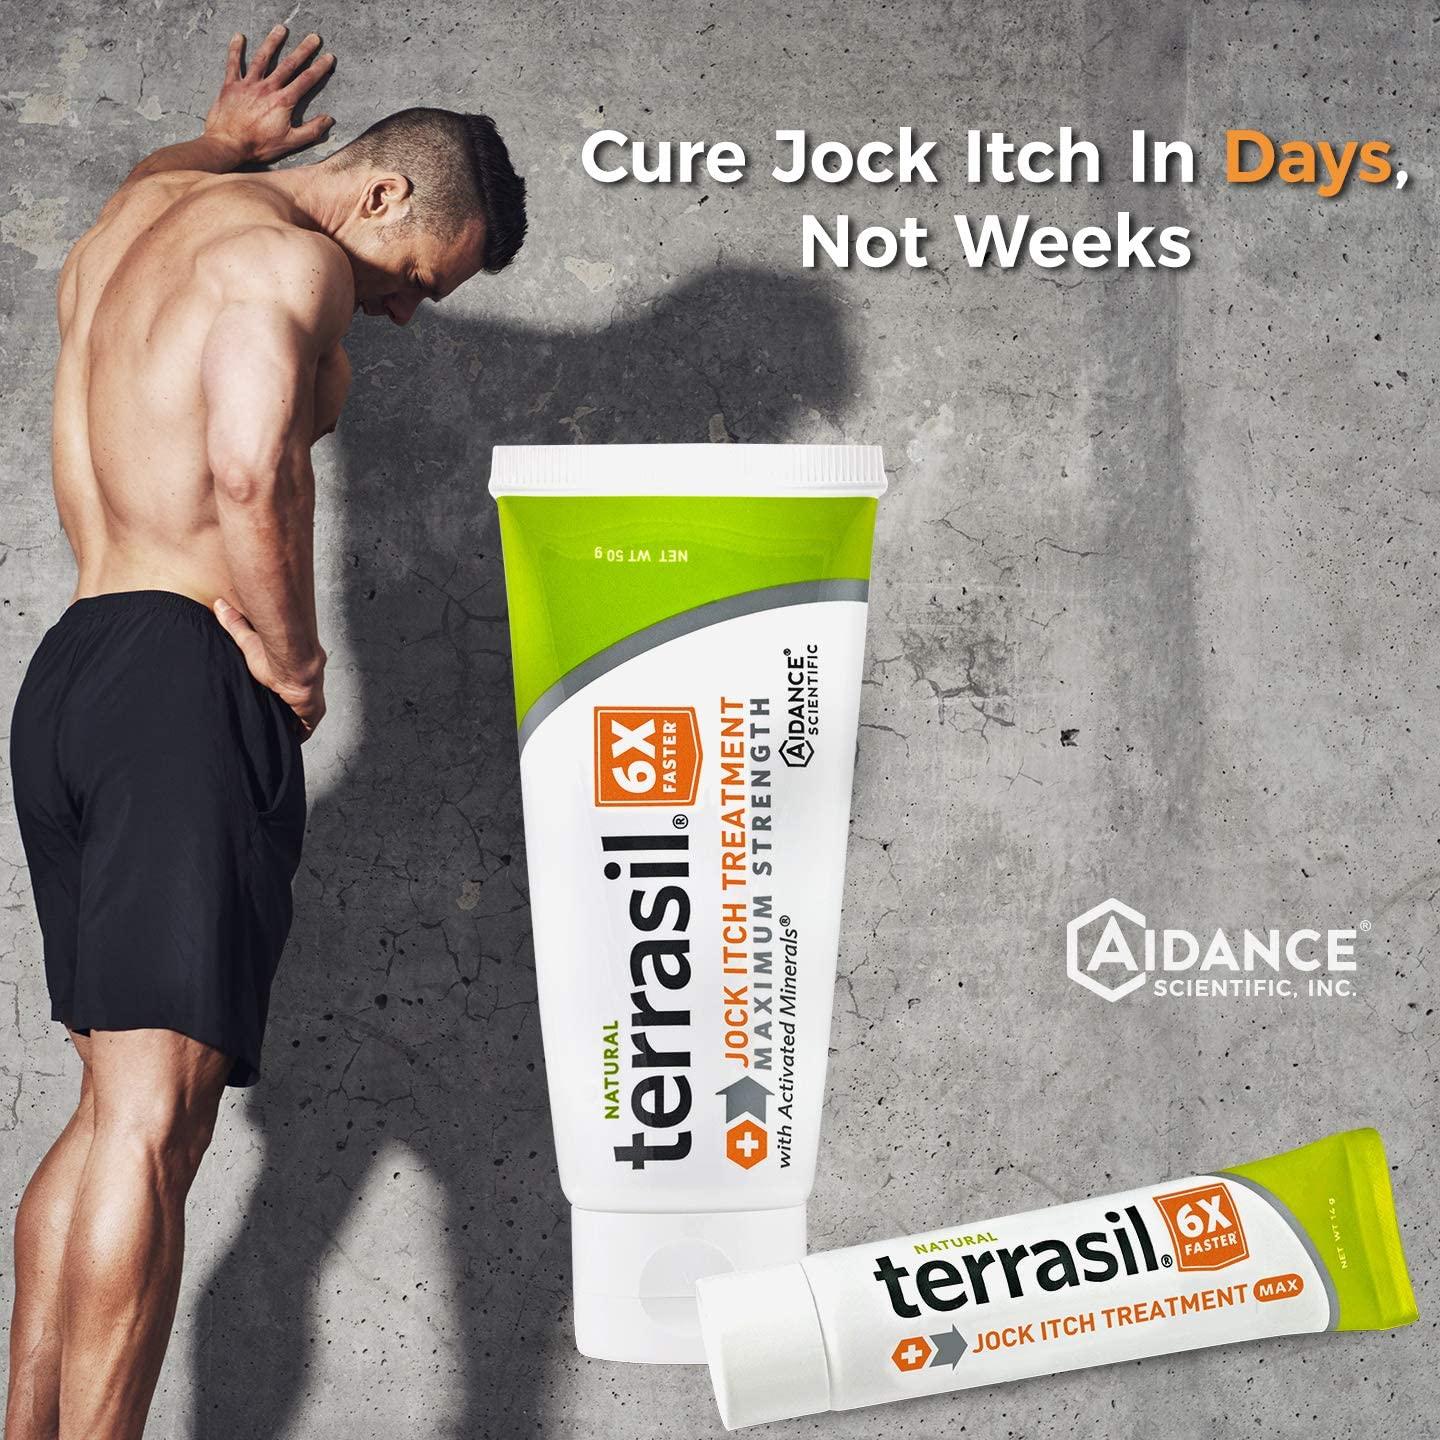 Buy Jock Itch MAX 14gm and Antifungal Cleansing Soap Kit - 6X Faster with  Natural Antifungal Ointment for Tinea Cruris Relieves Itch by Terrasil  Online at desertcartSouth Africa